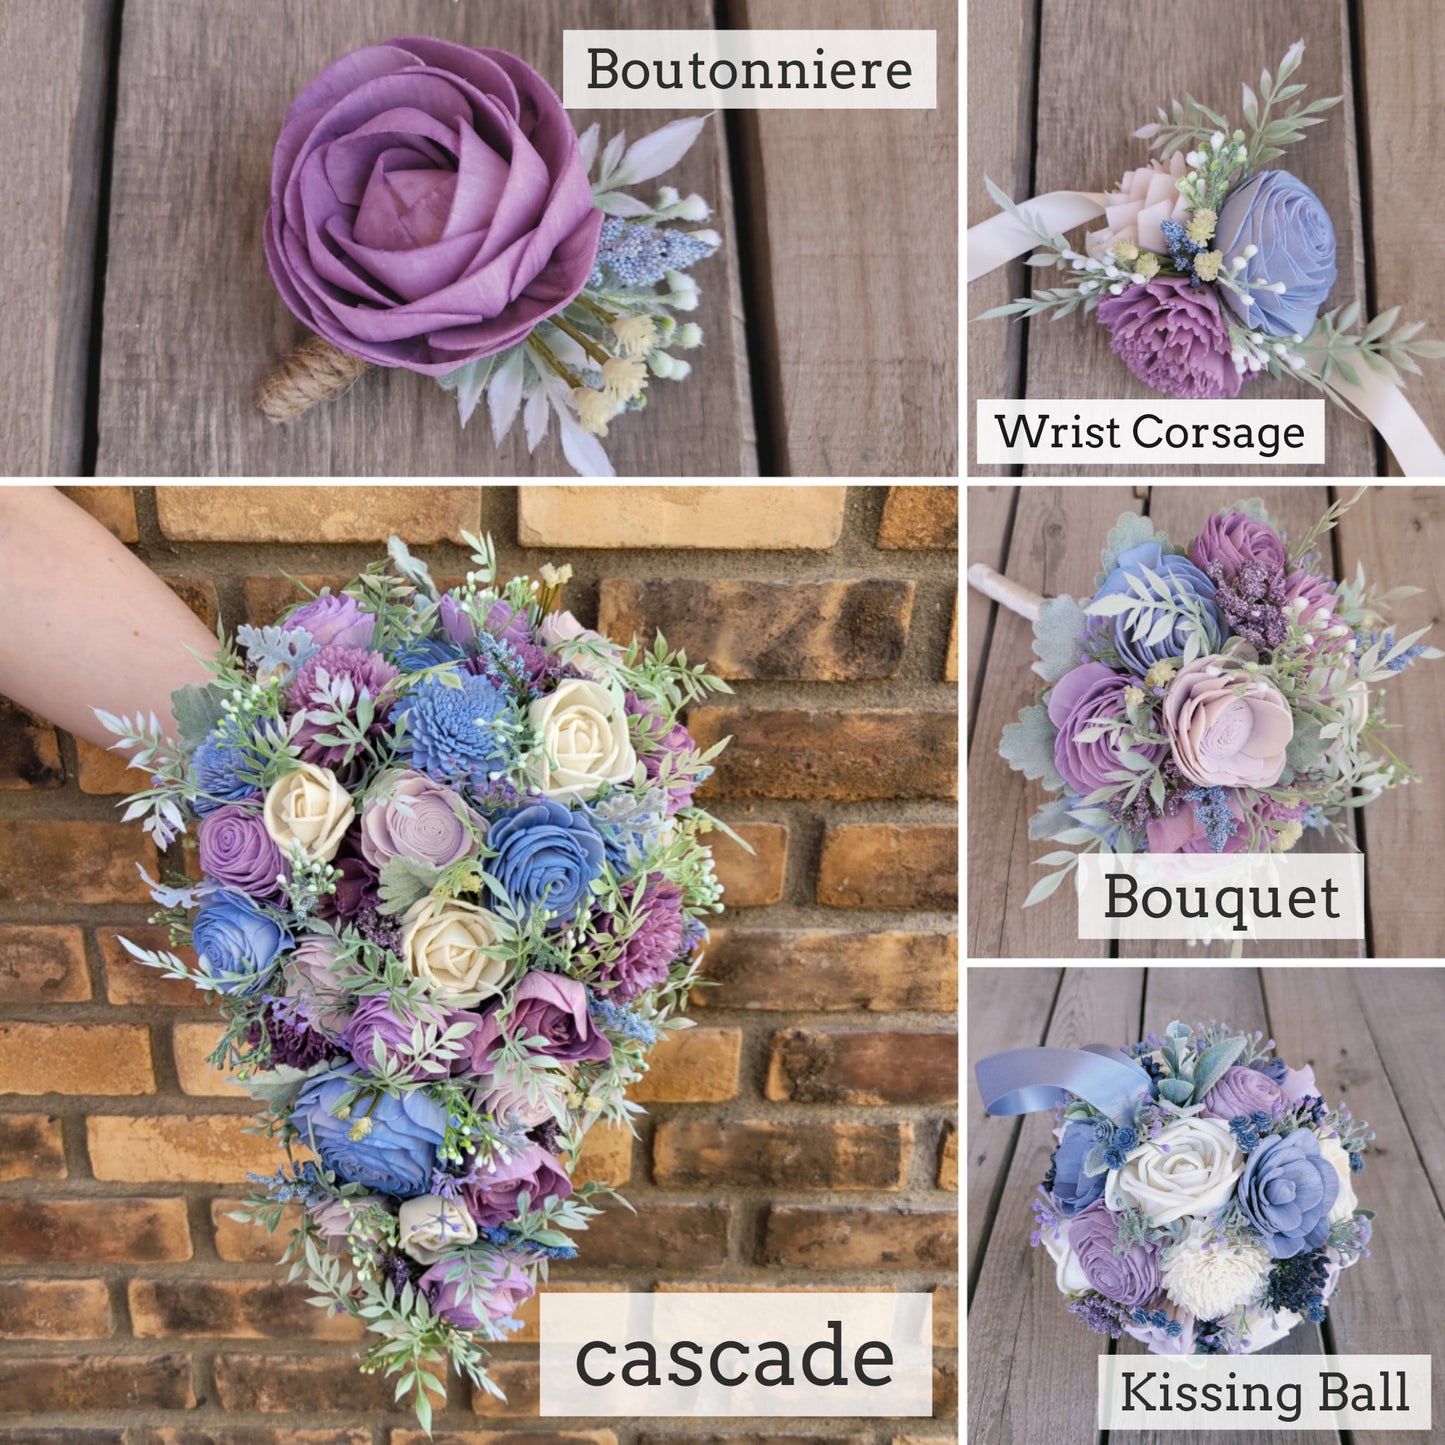 Sola Wood Flower Bouquet with Baby's Breath, Bridal Bouquet, Wedding Flowers, Wooden Bride Bouquet